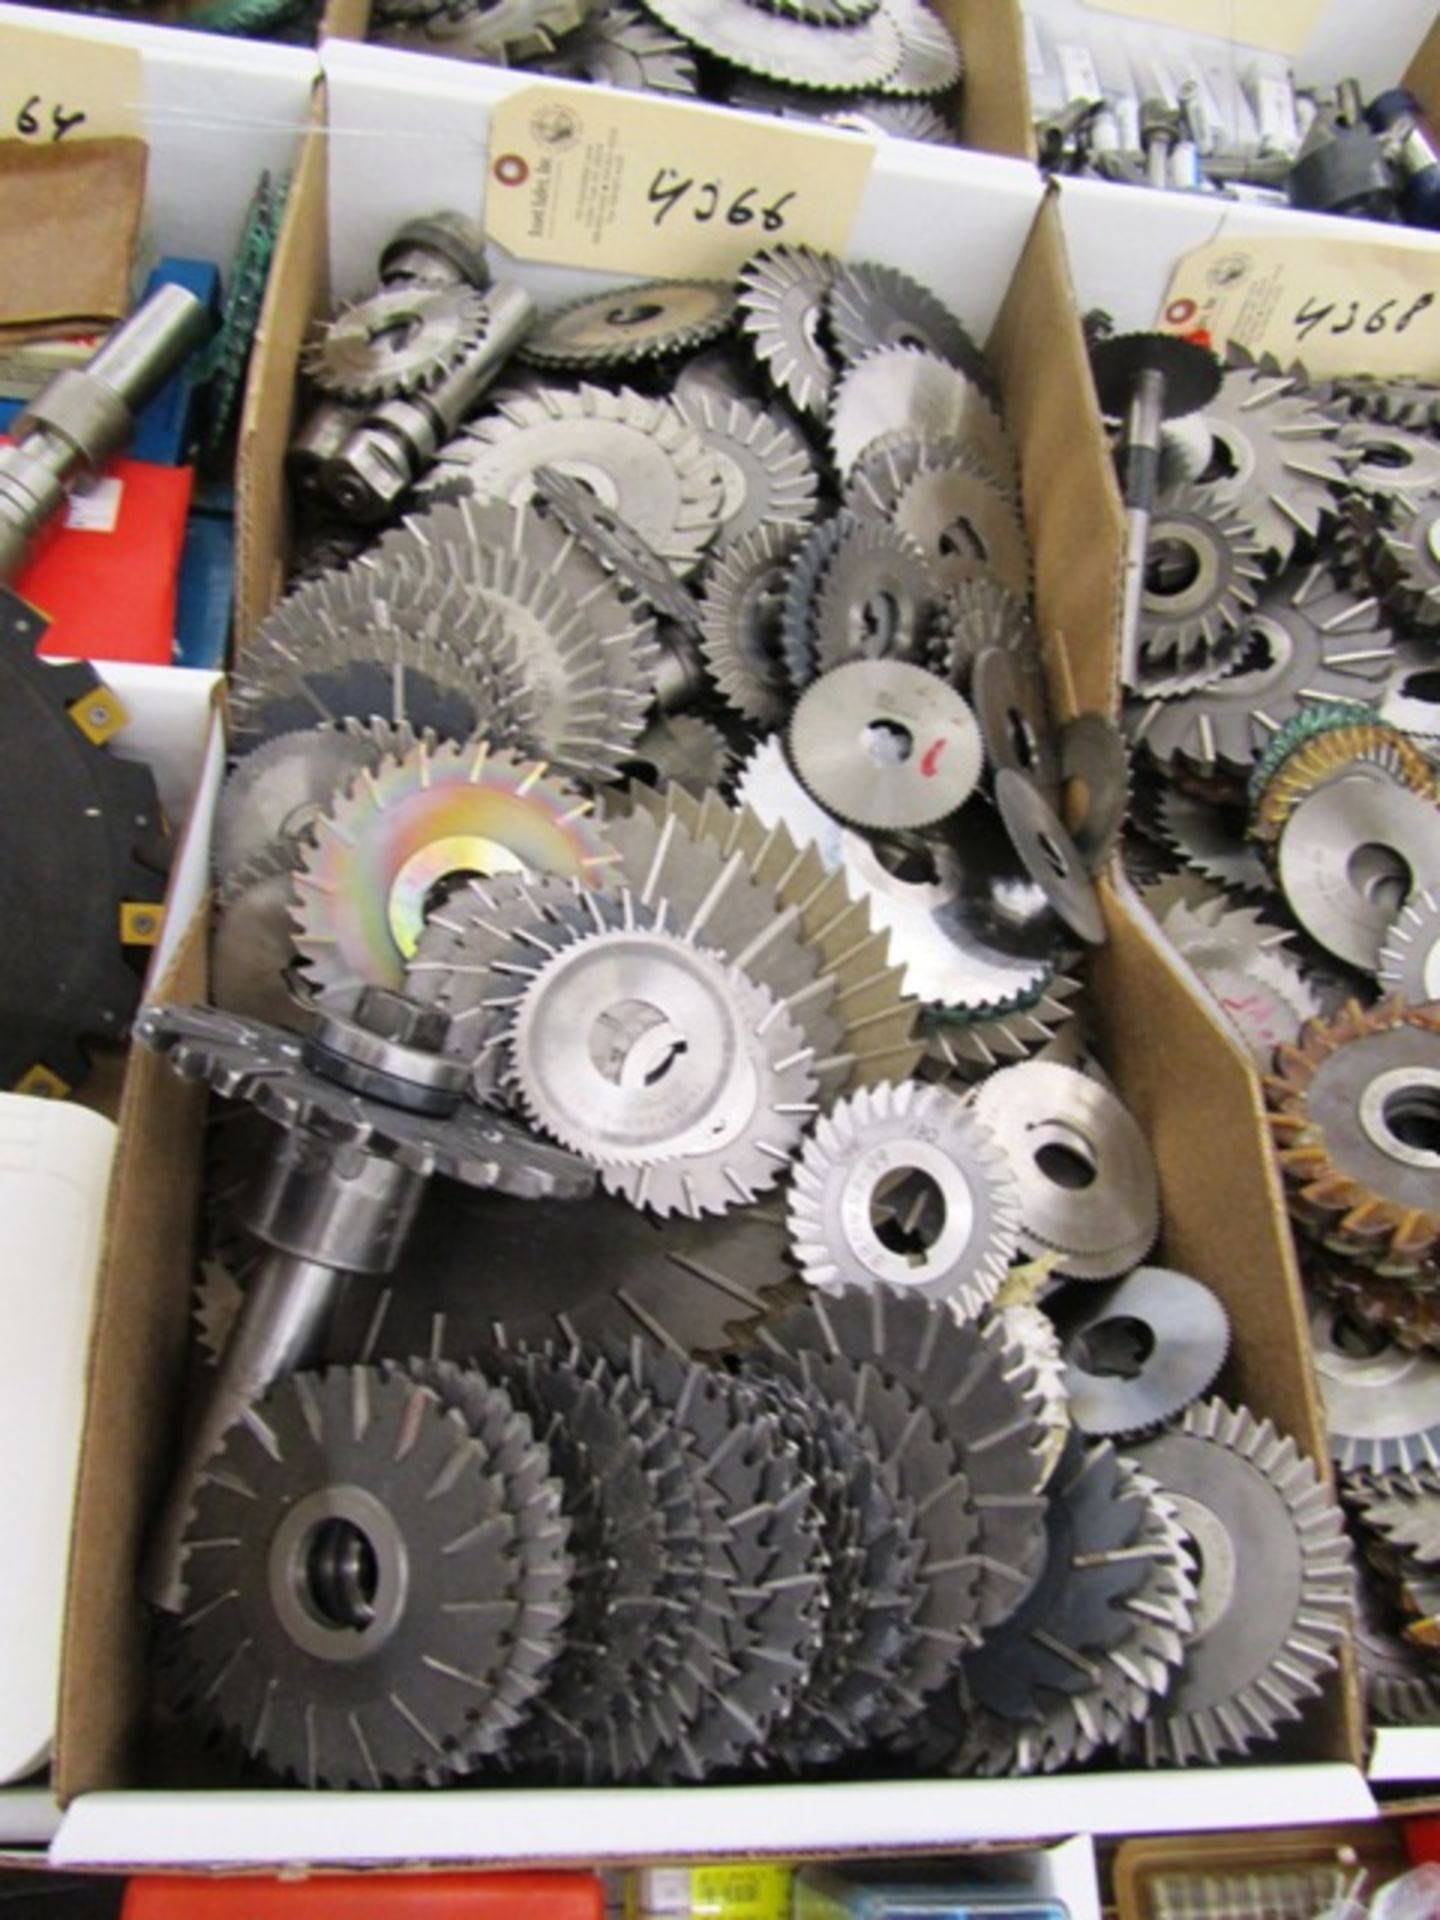 Milling Cutters / Slitting Saws